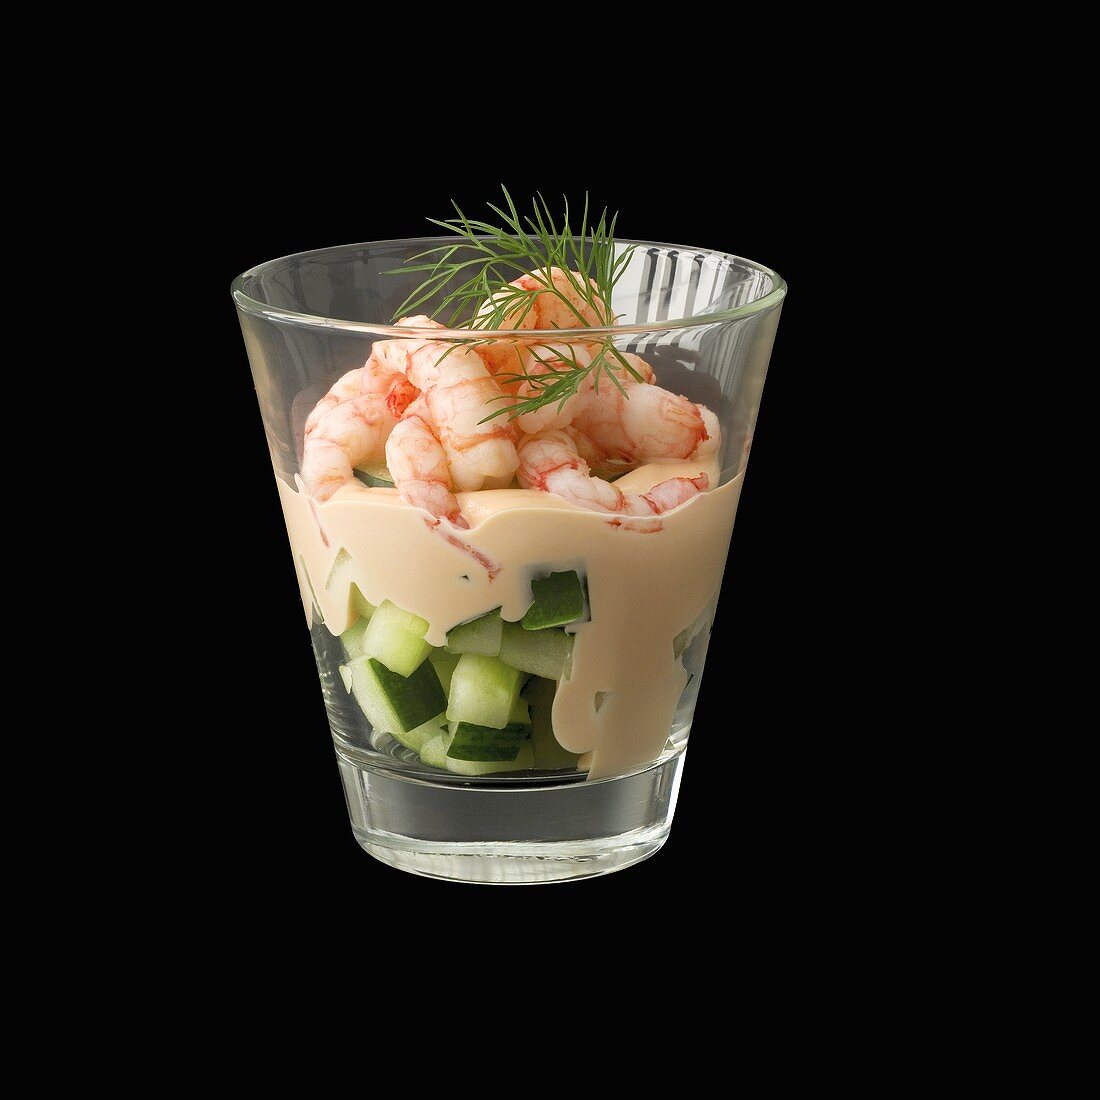 Shrimp cocktail on diced cucumber in glass